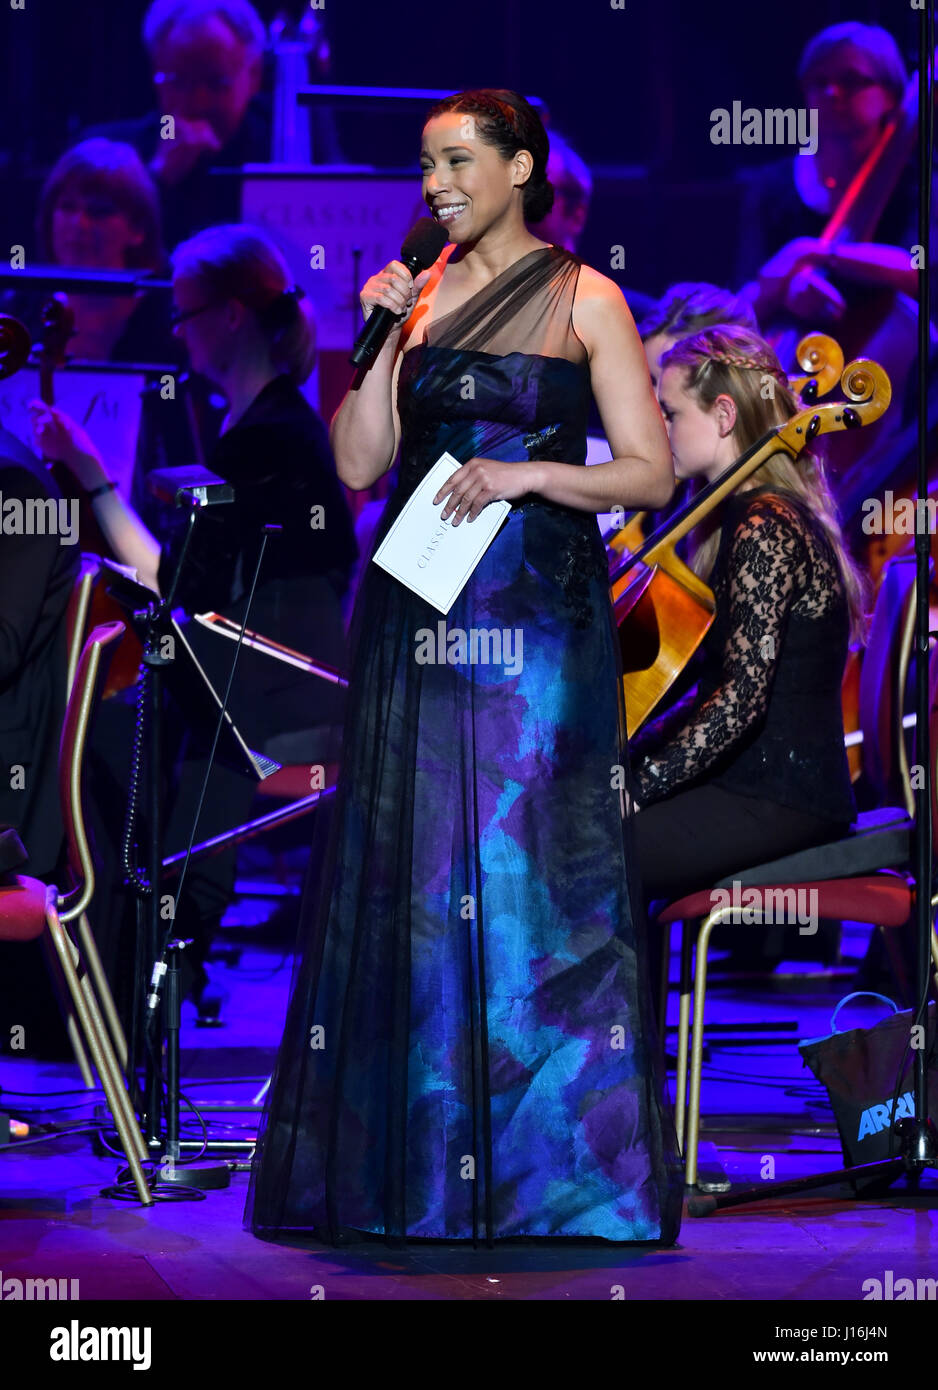 Margherita Taylor on stage at Classic FM Live at the Royal Albert Hall in London. The Concert is hosted by the UK's most popular classical music station, Classic FM. PRESS ASSOCIATION Photo. Picture date: Tuesday April 18, 2017. Photo credit should read: Matt Crossick/PA Wire Stock Photo